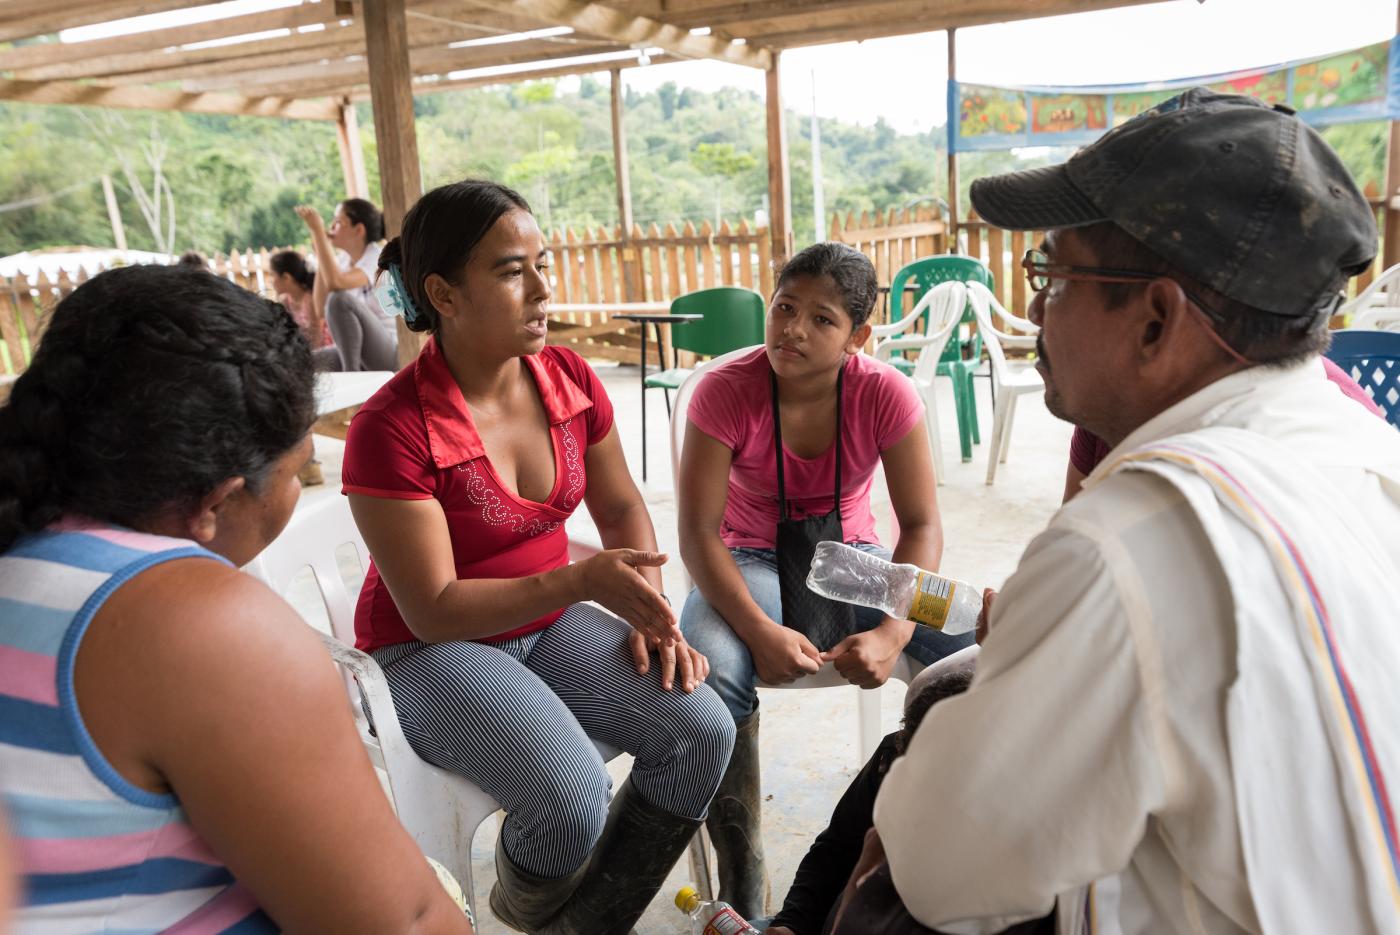 Woman leads conversation in rural Colombia